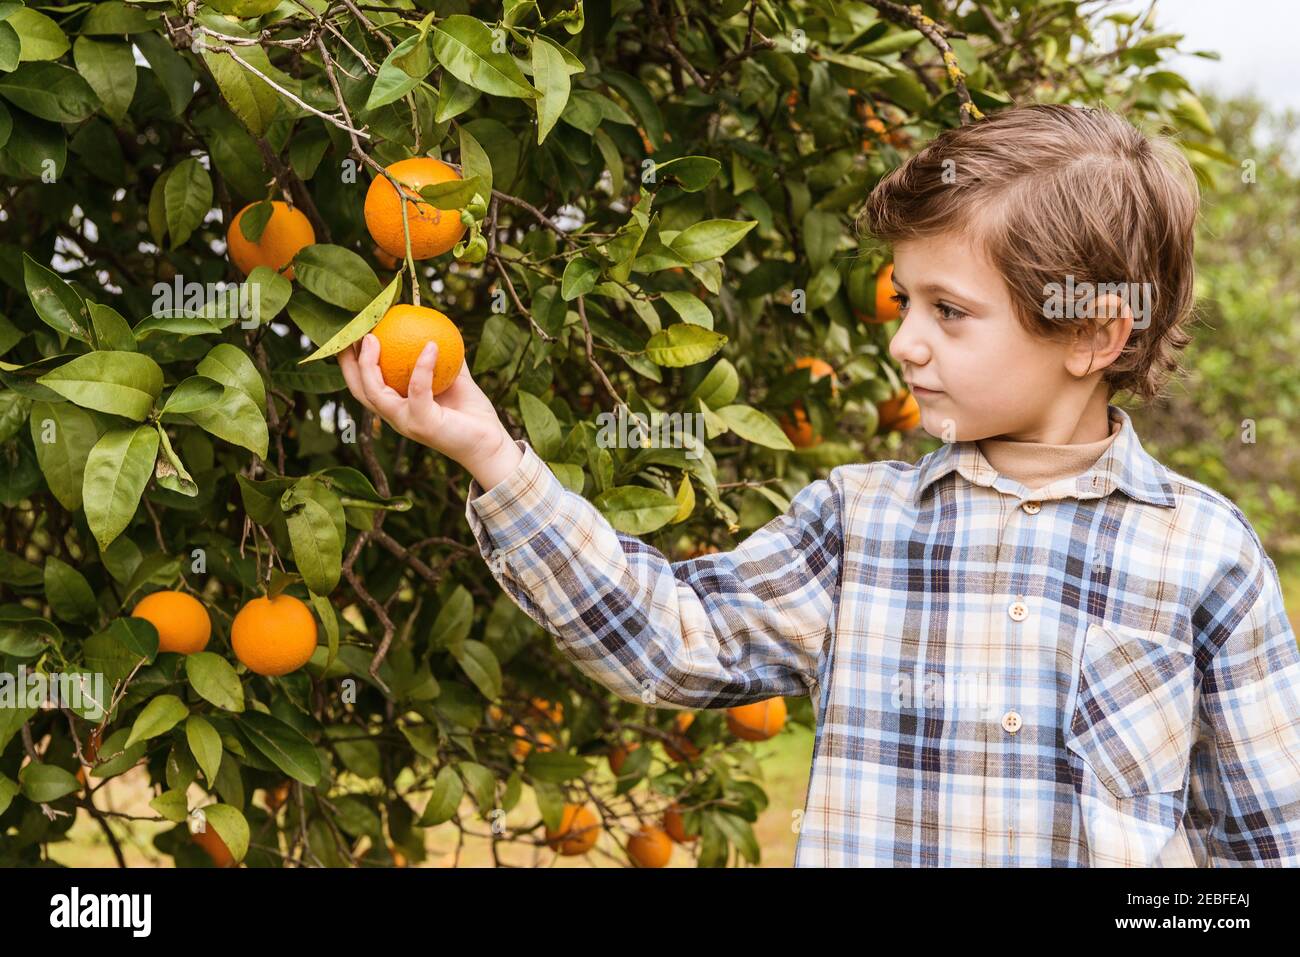 Caucasian child picking an orange from the branch of an orange tree. Stock Photo